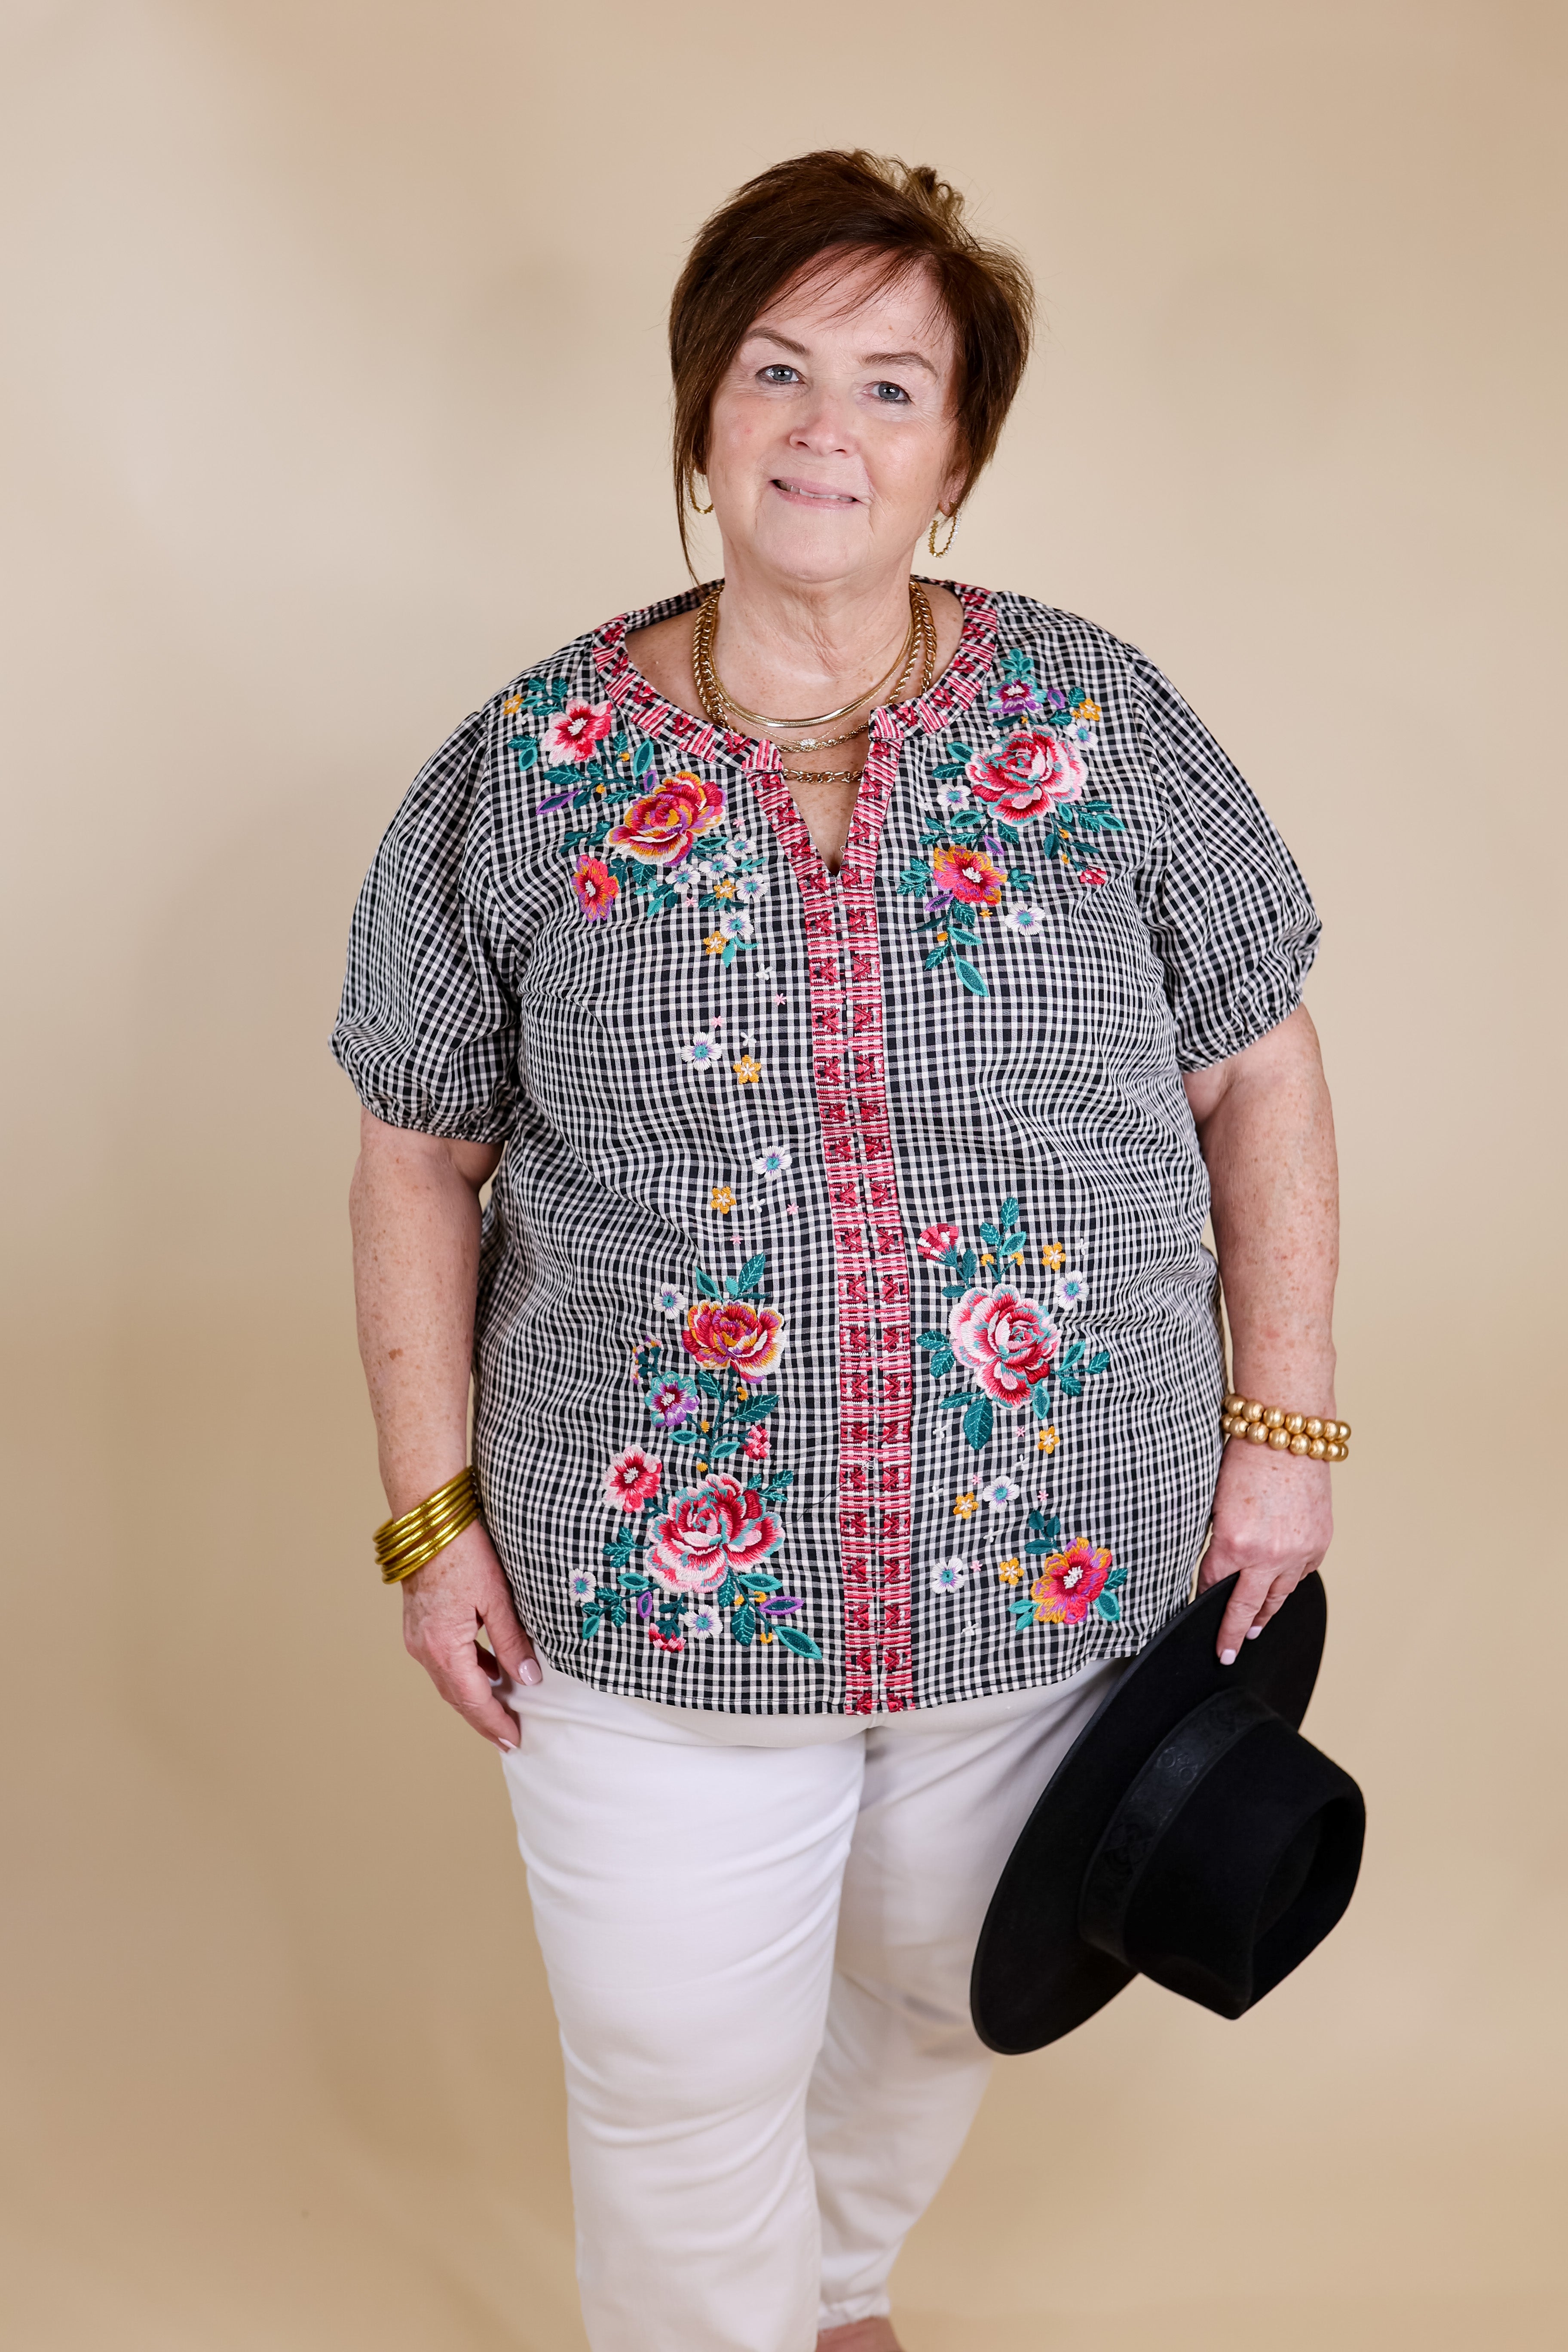 Picnic Perfect Plaid Notch Neck Top with Floral Embroidery in Black and White - Giddy Up Glamour Boutique